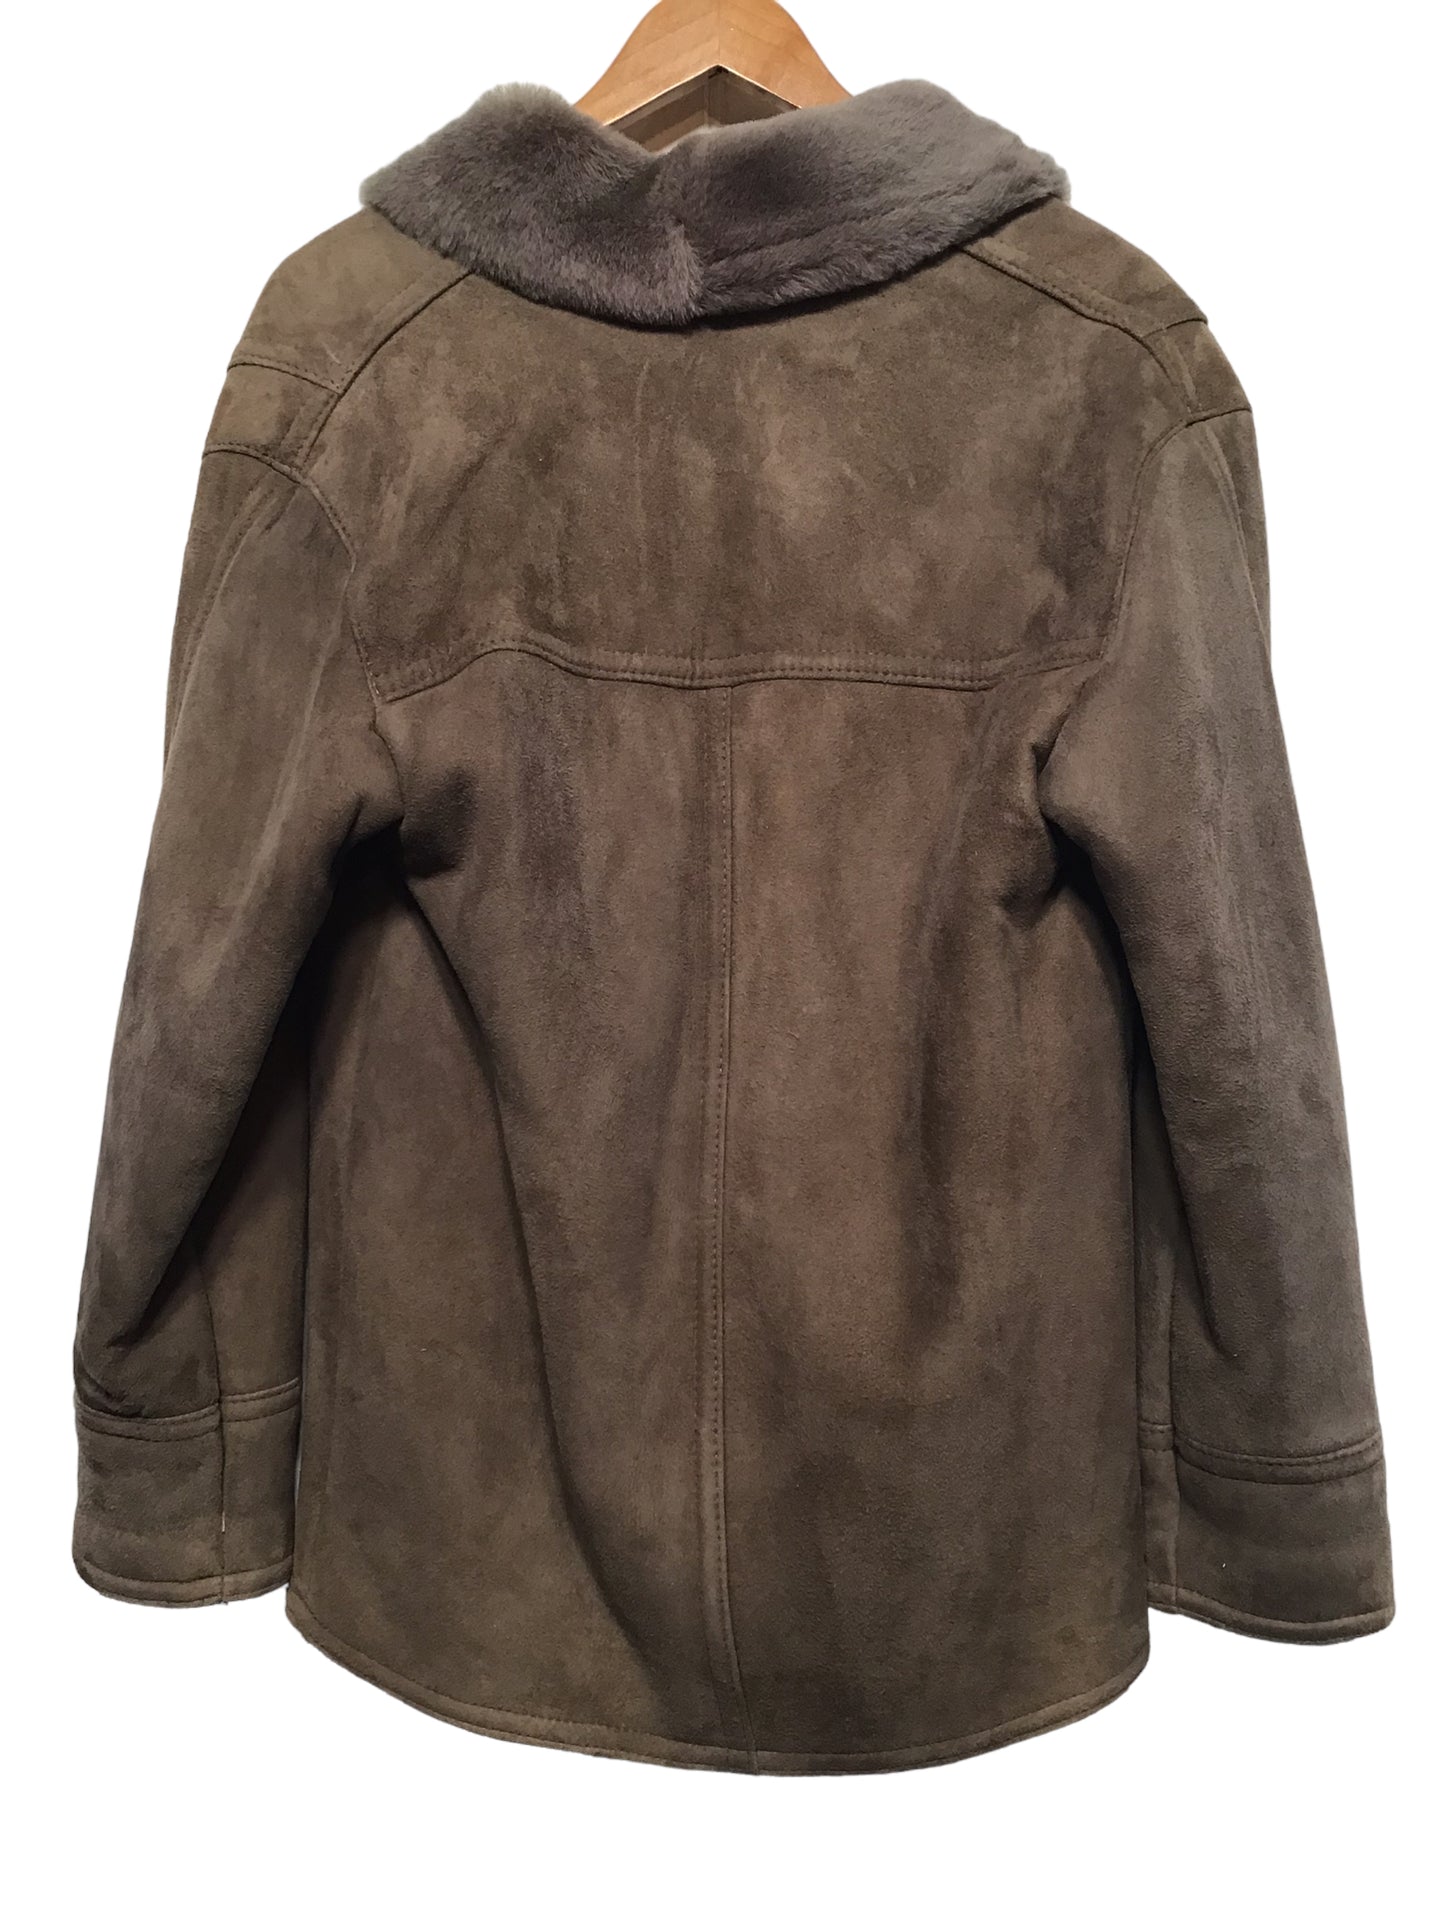 Suede and Shearling Jacket (Size M)